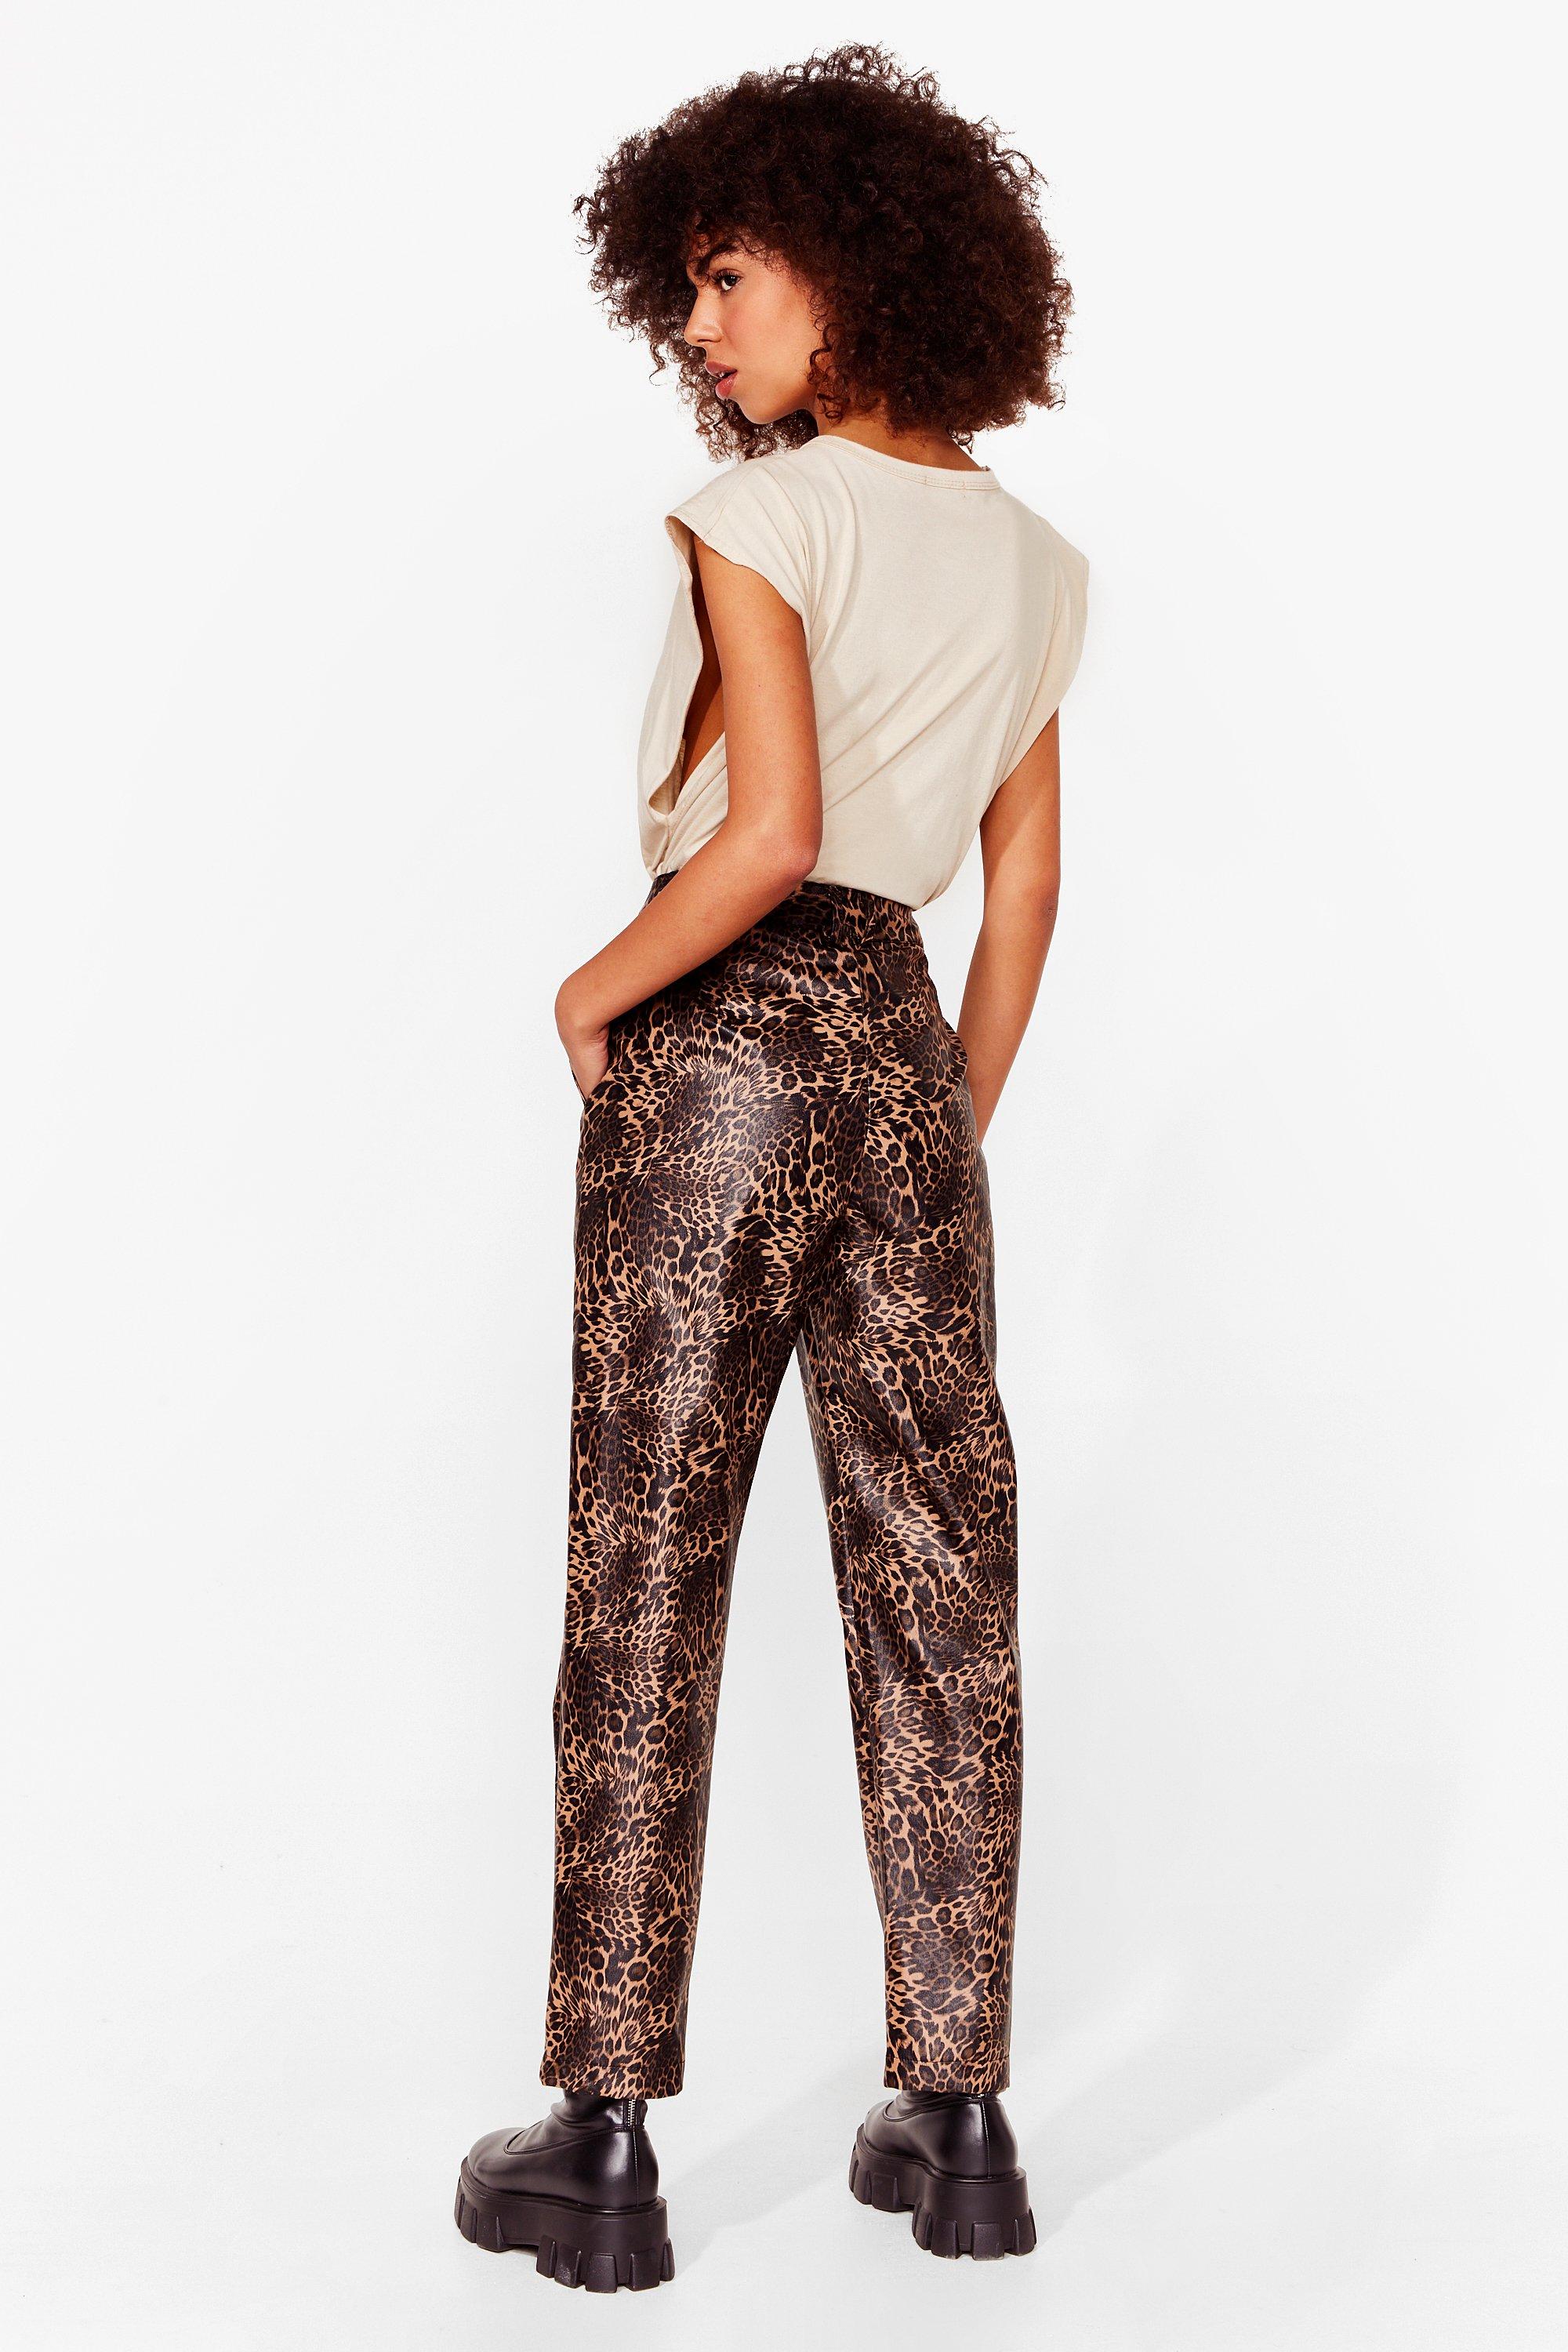 Faux-Leather Pants: Zara Animal Embossed Faux-Leather Flared Pants